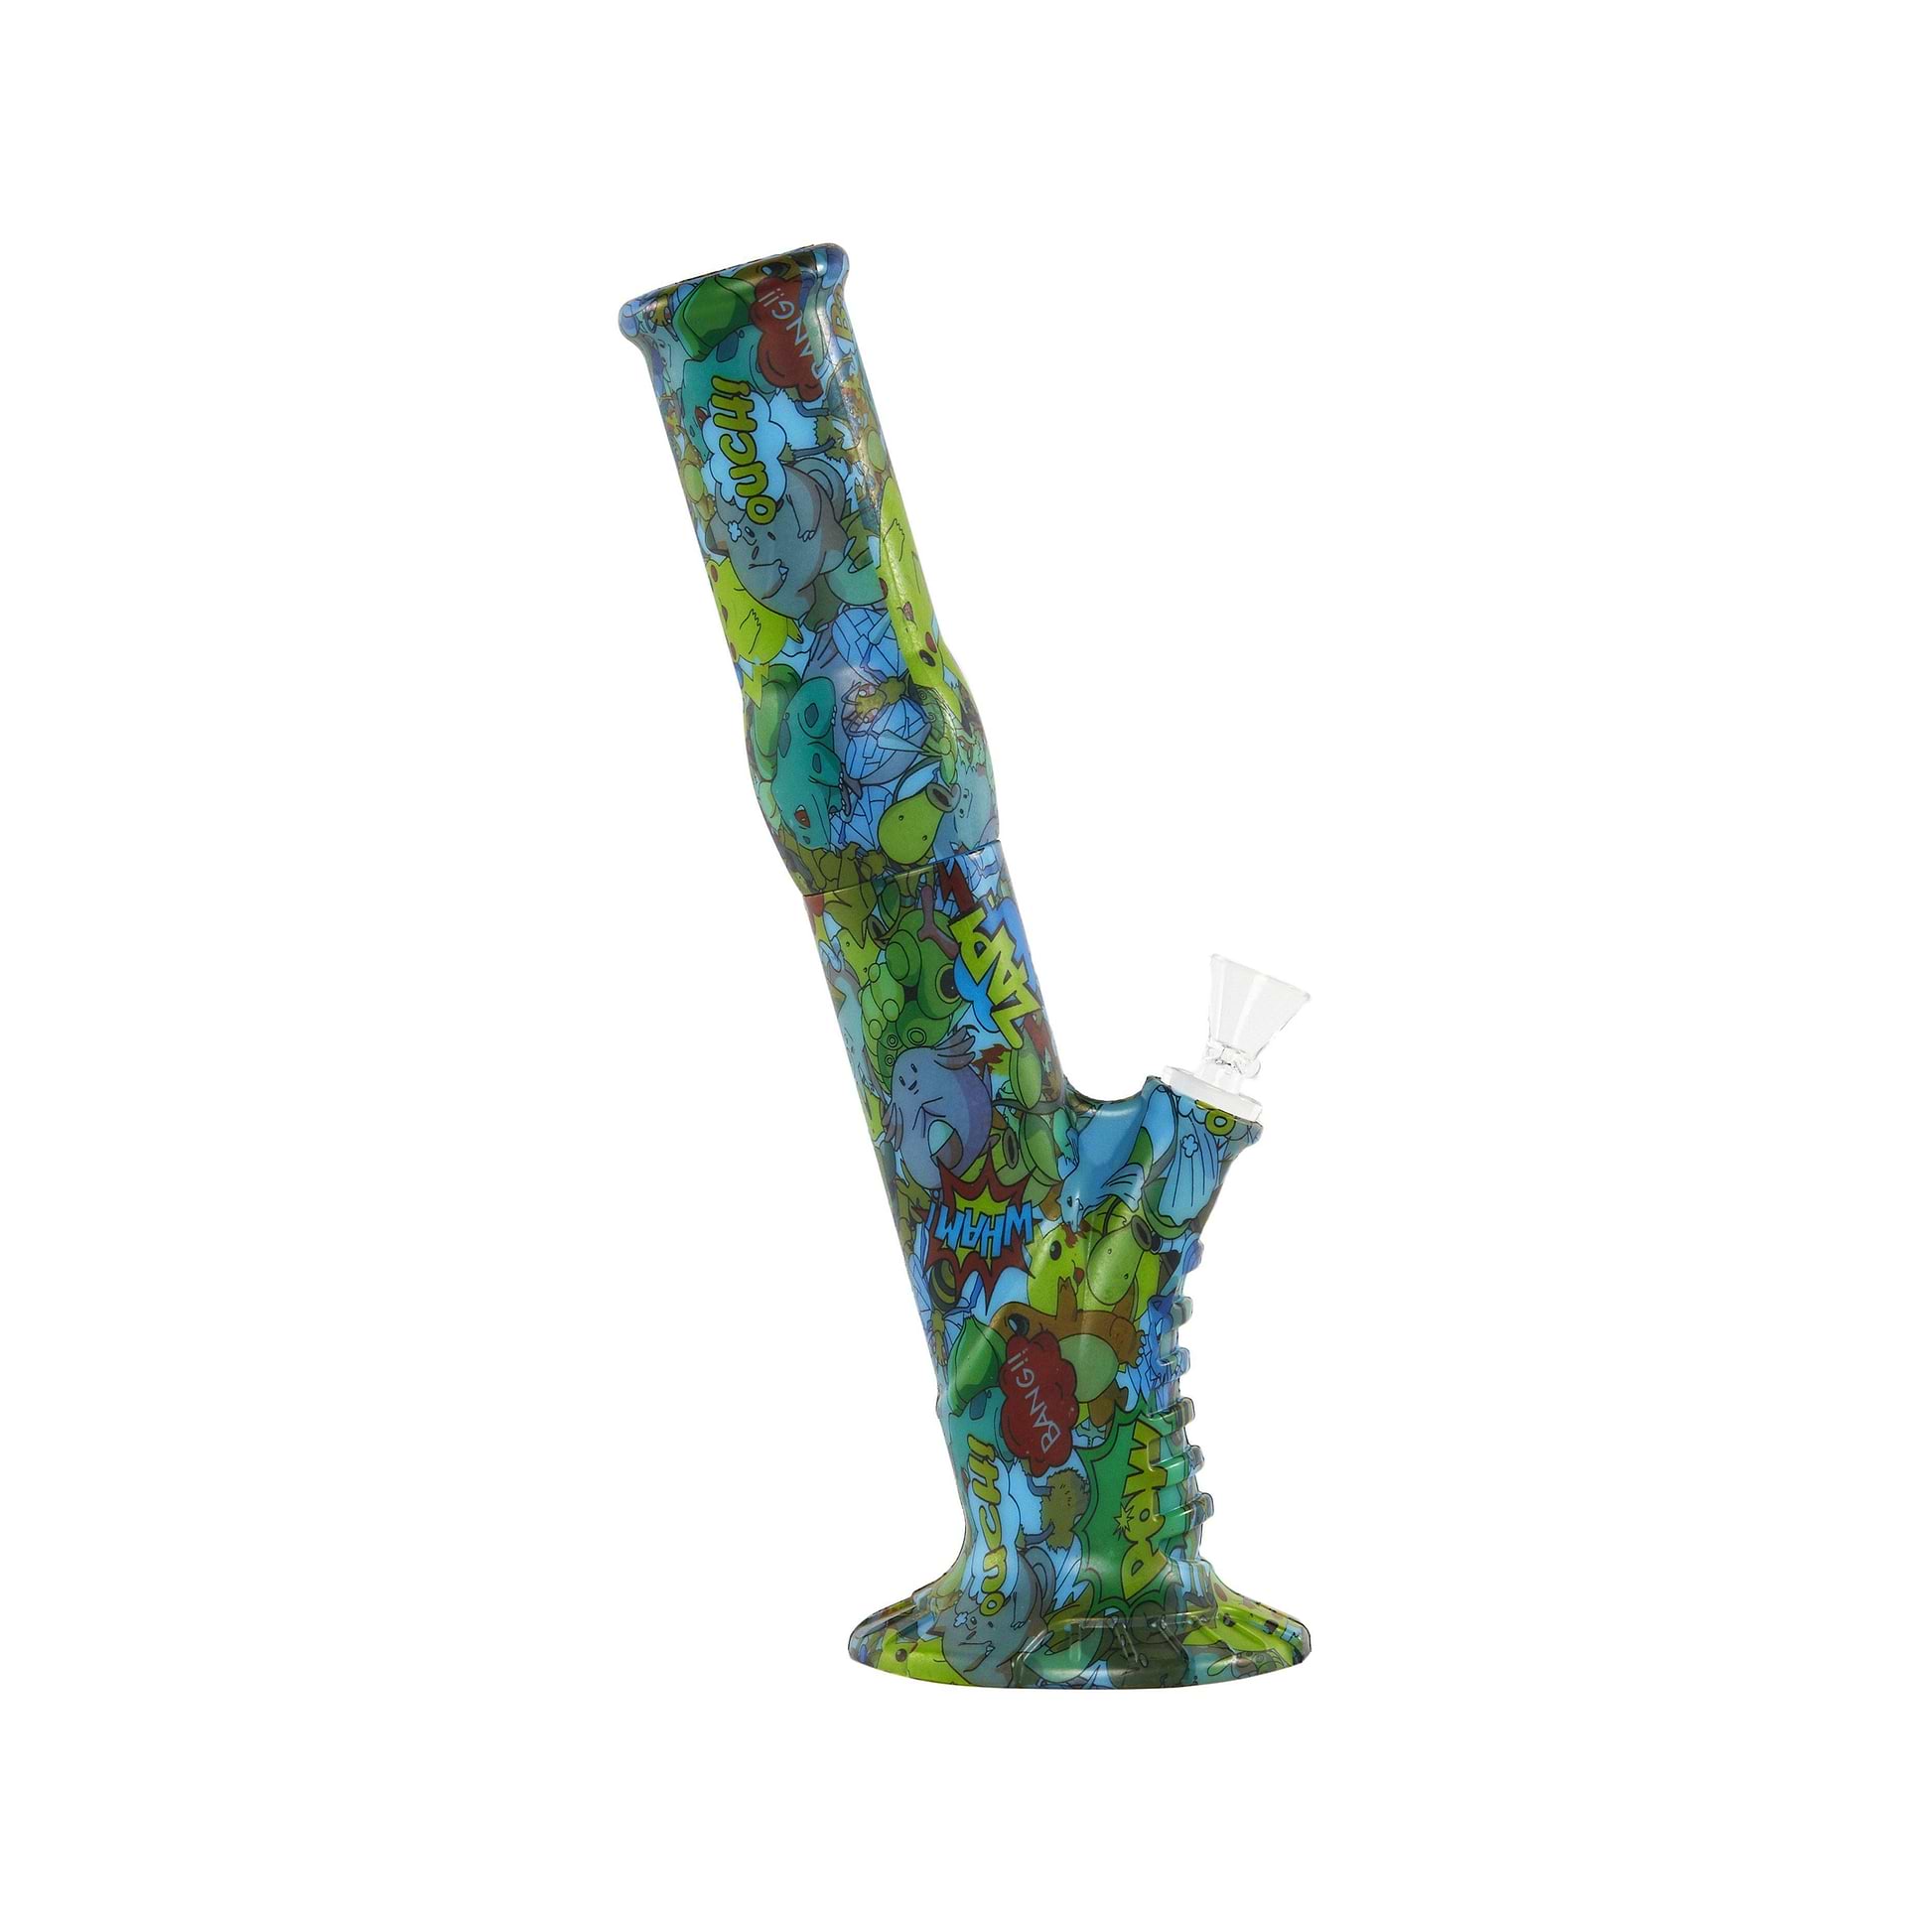 13-inch silicone bong smoking device sleek straight tube slanted look with Graffiti design wide base